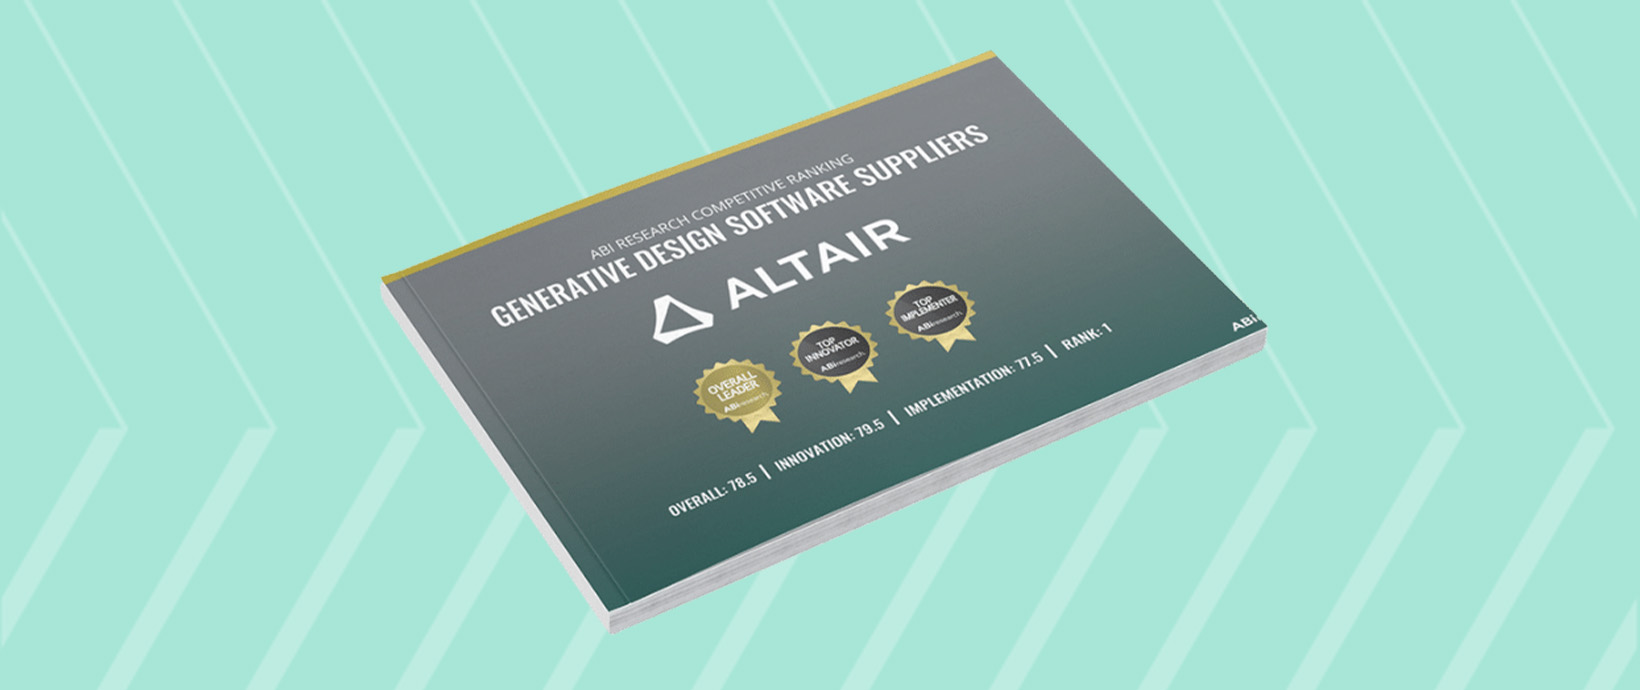 Altair Secures ABI Research’s Top Spot for Generative Design Software Suppliers